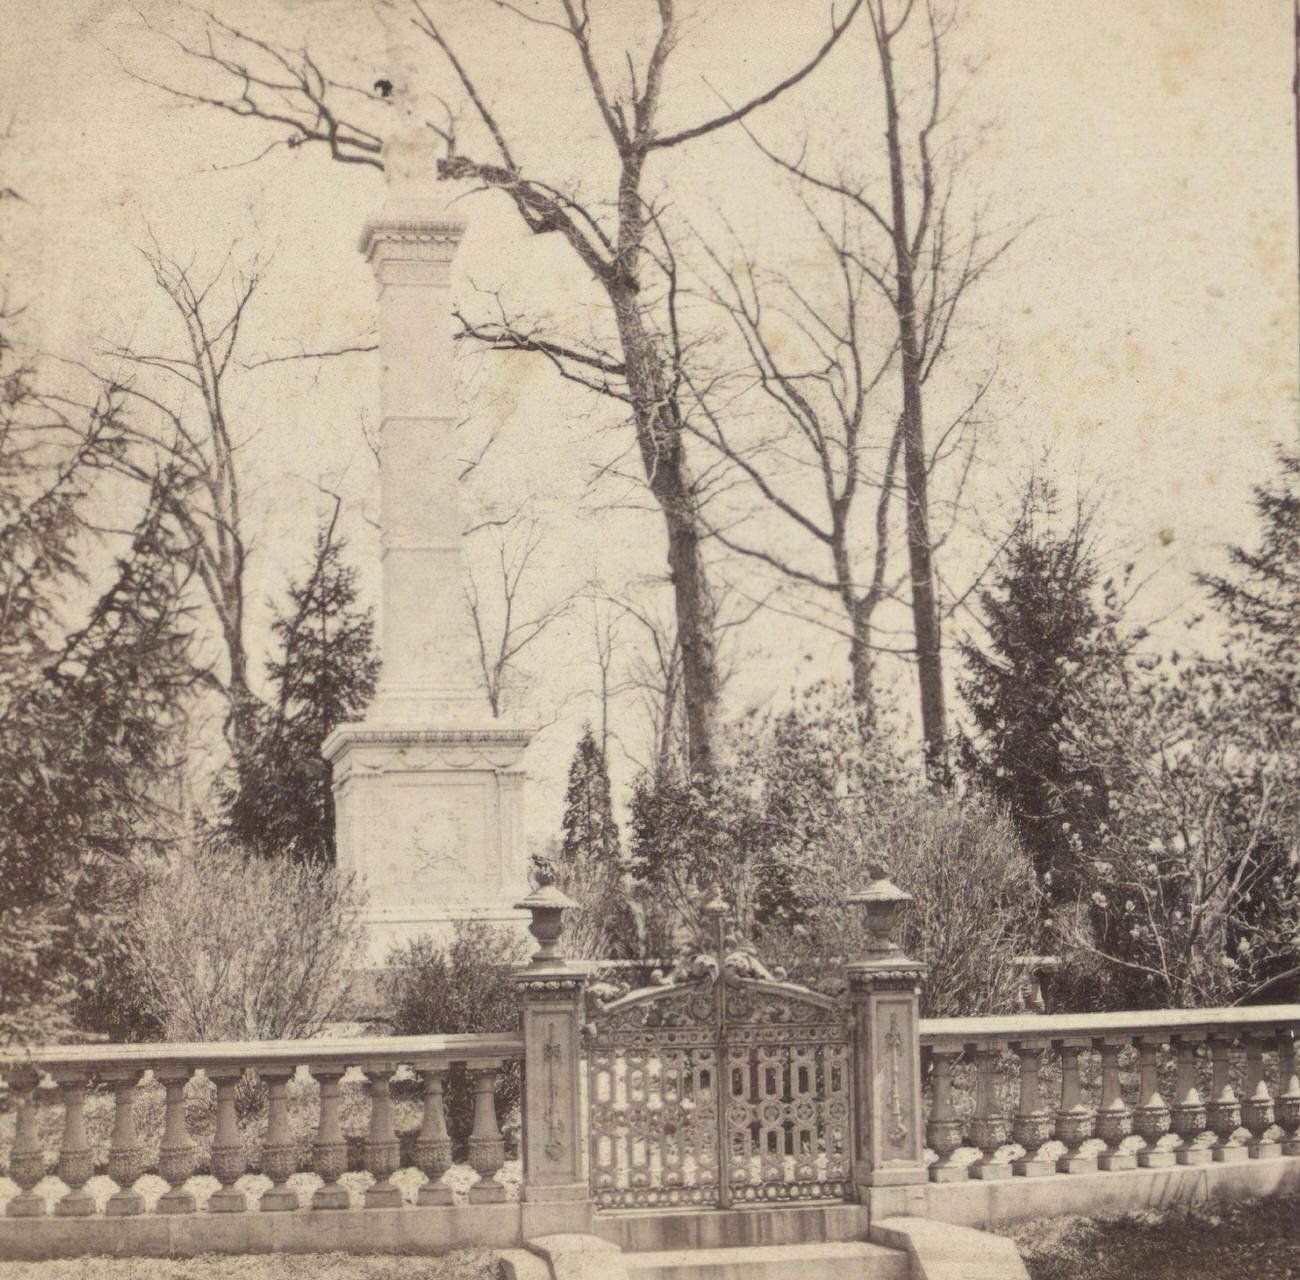 Front View Of New York Fire Department'S Monument, Brooklyn, 1873